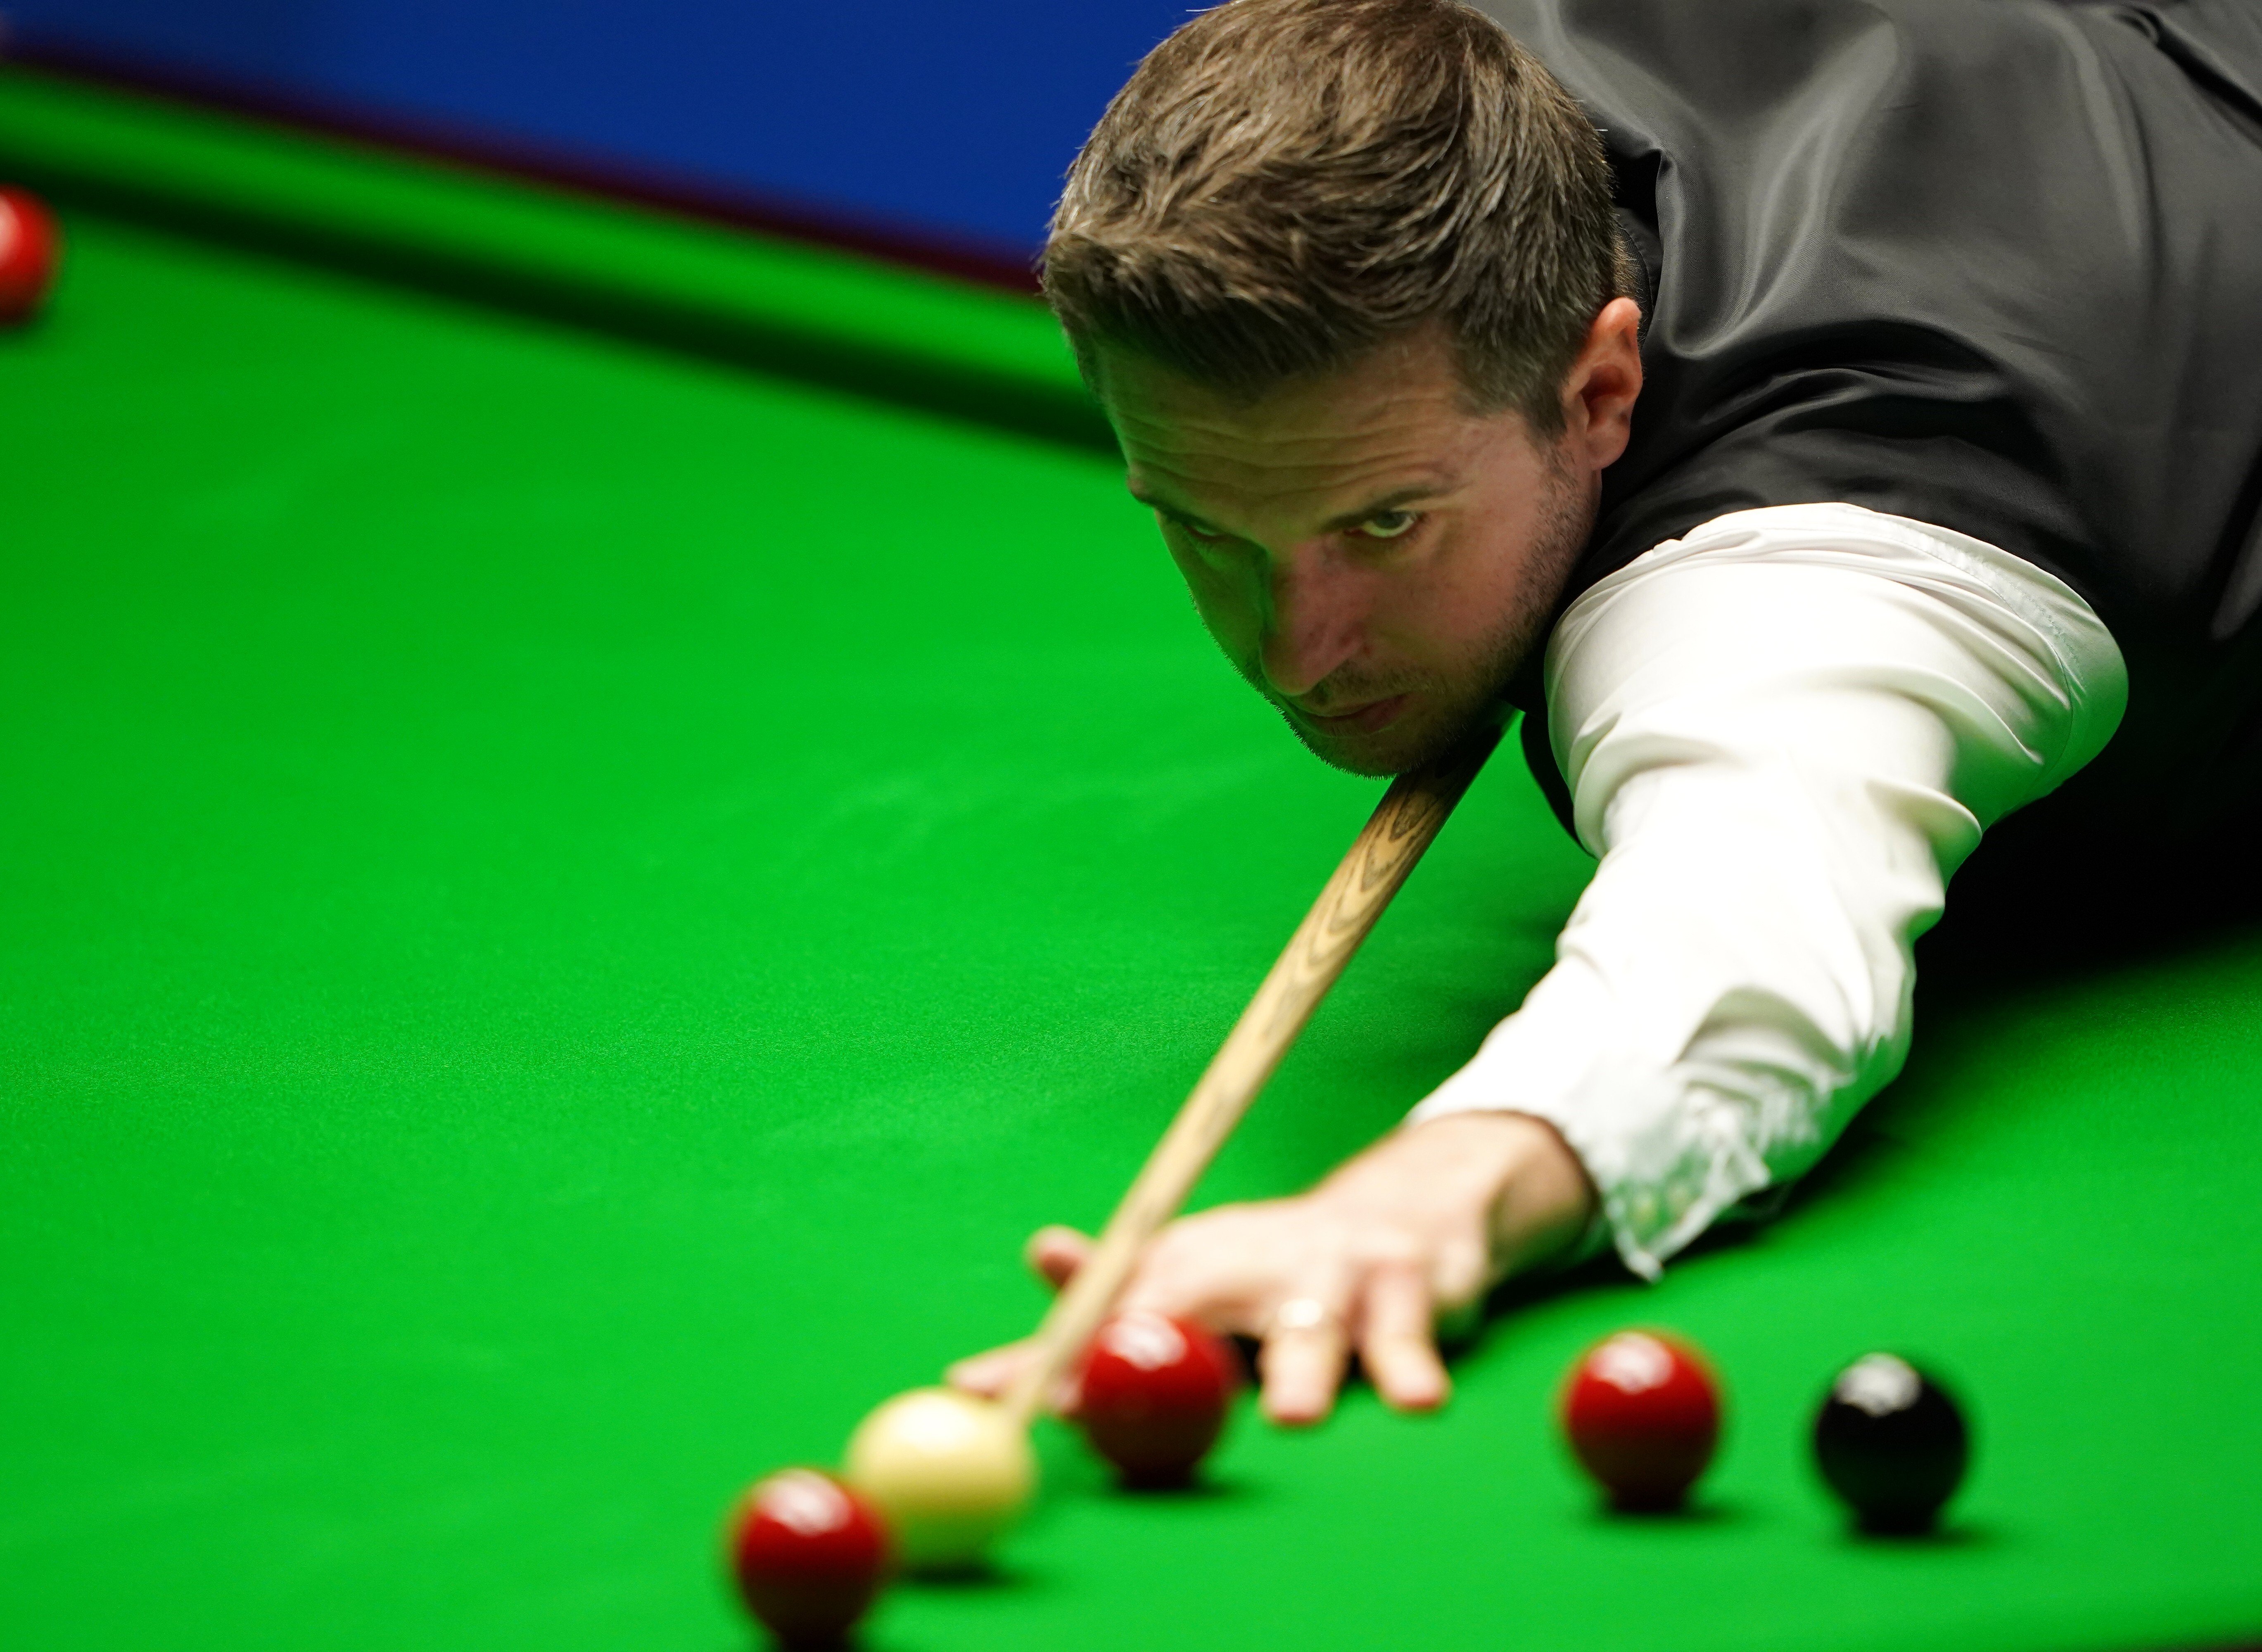 England’s Mark Selby hold the advantage over Shaun Murphy in their World Championship final after day one. Photo: Zac Goodwin – Pool/Getty Images